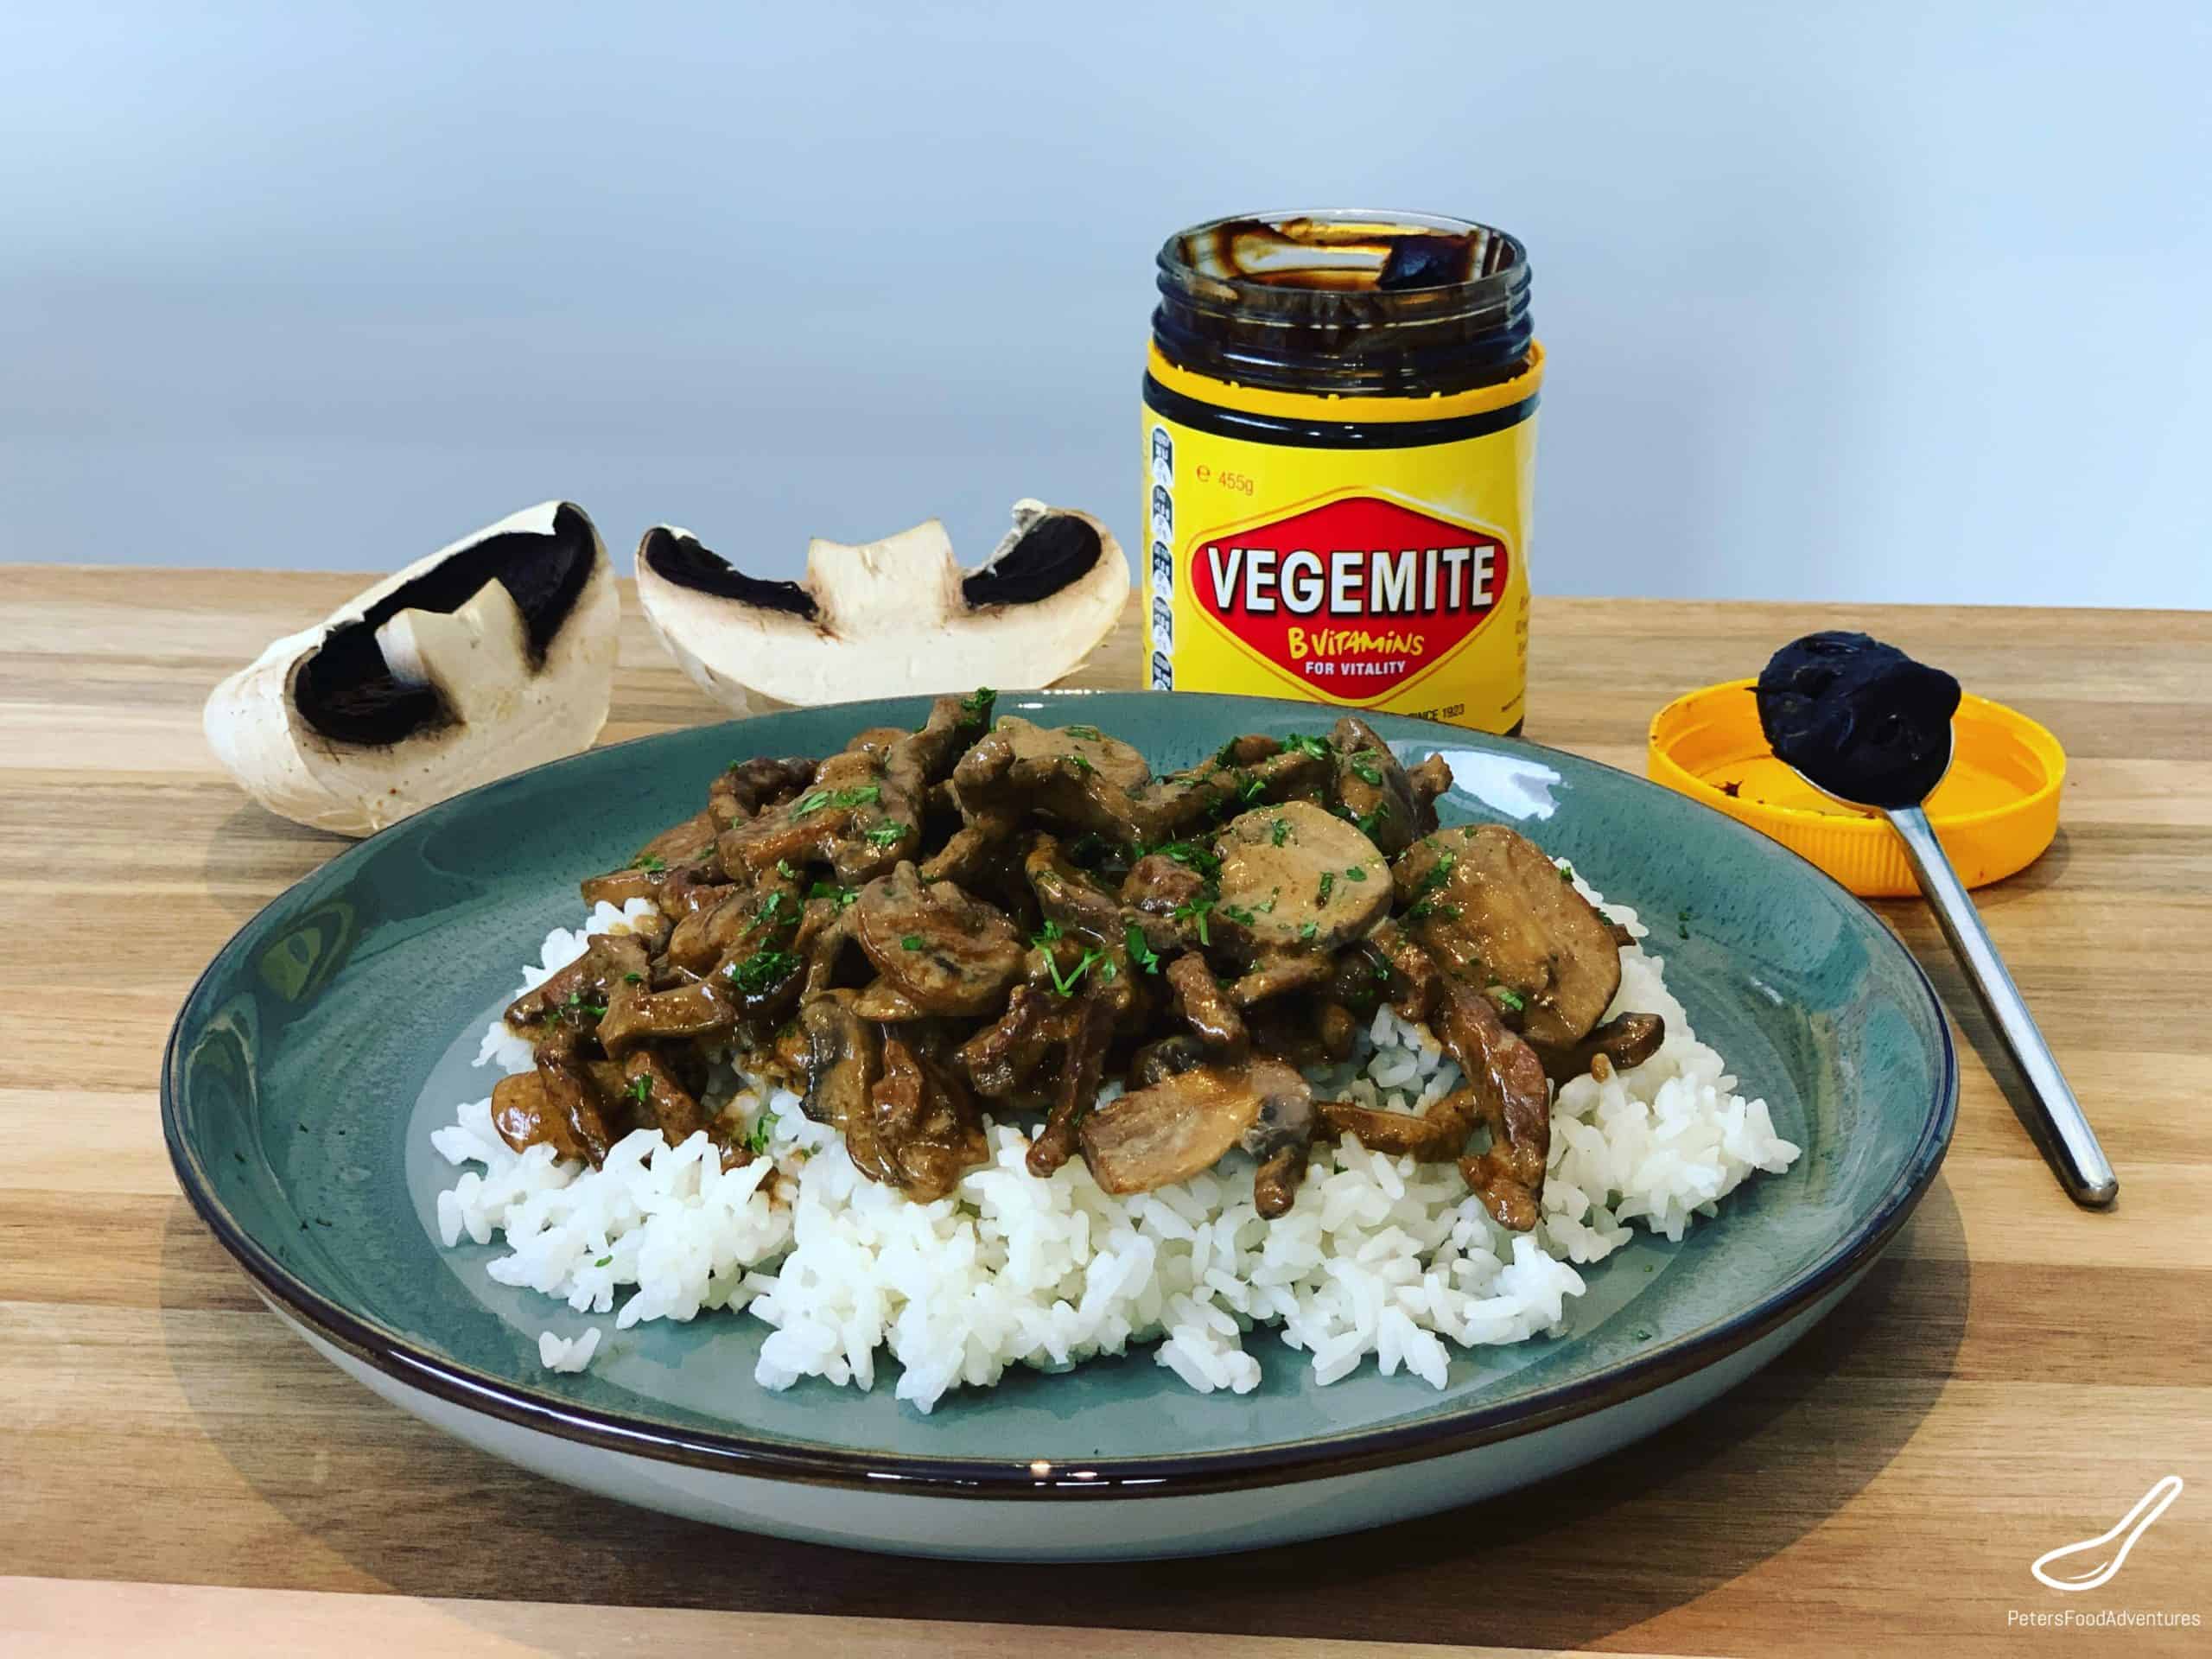 Vegemite Stroganoff made with Aussie Vegemite, made with beef, mushrooms and served over rice. A new Vegemite recipes everyone will love!